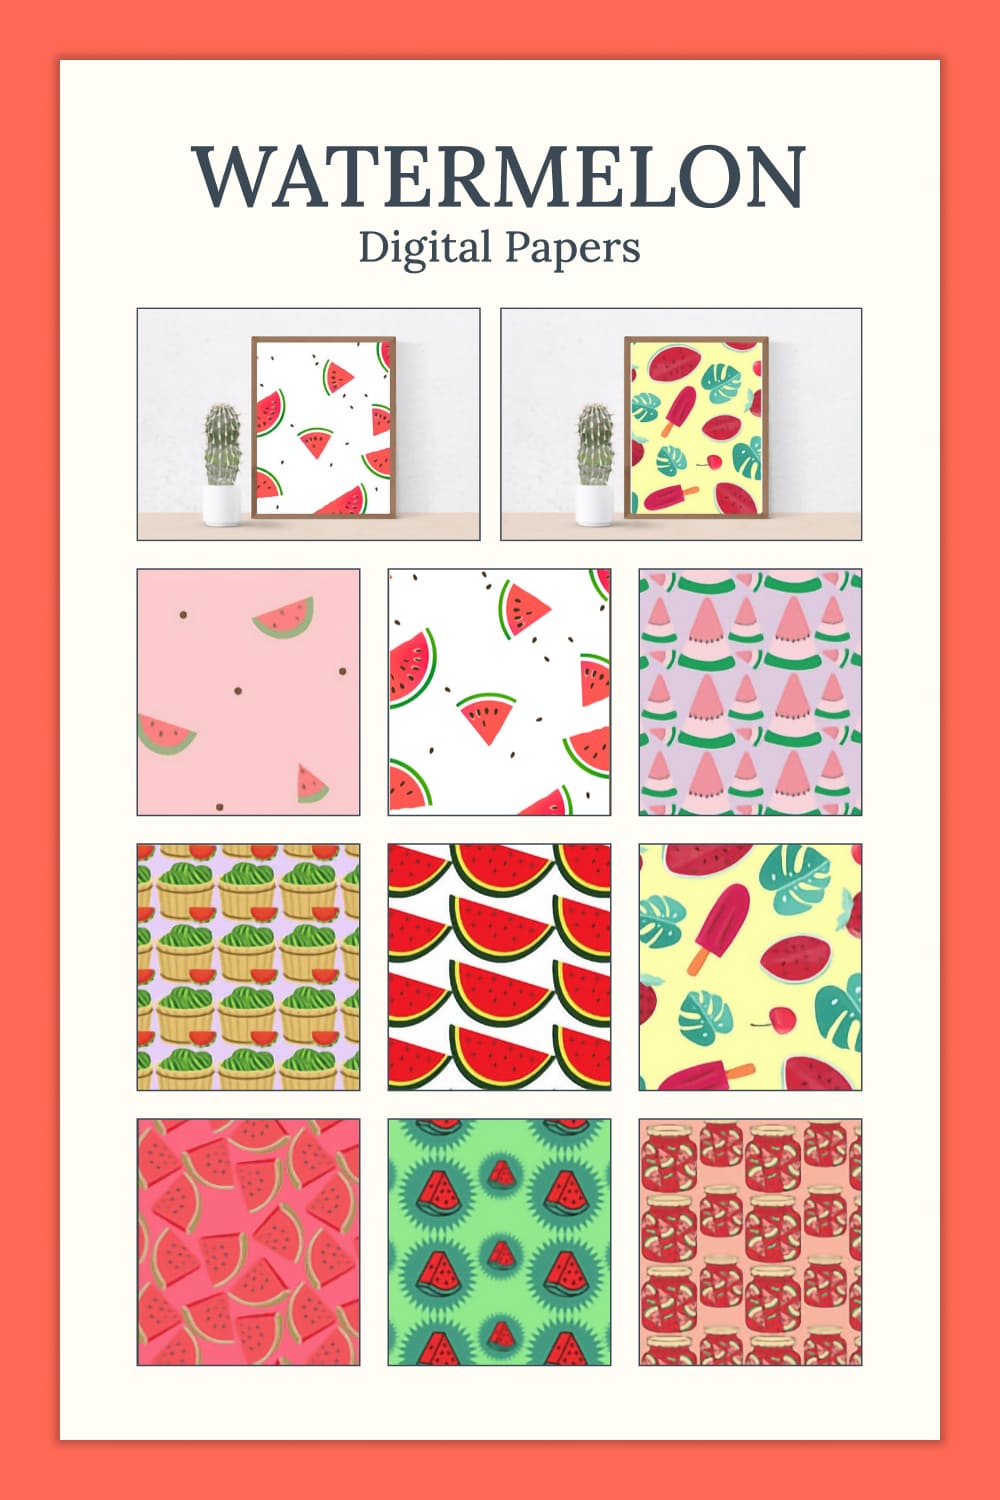 Pieces of watermelons are drawn on patterns.